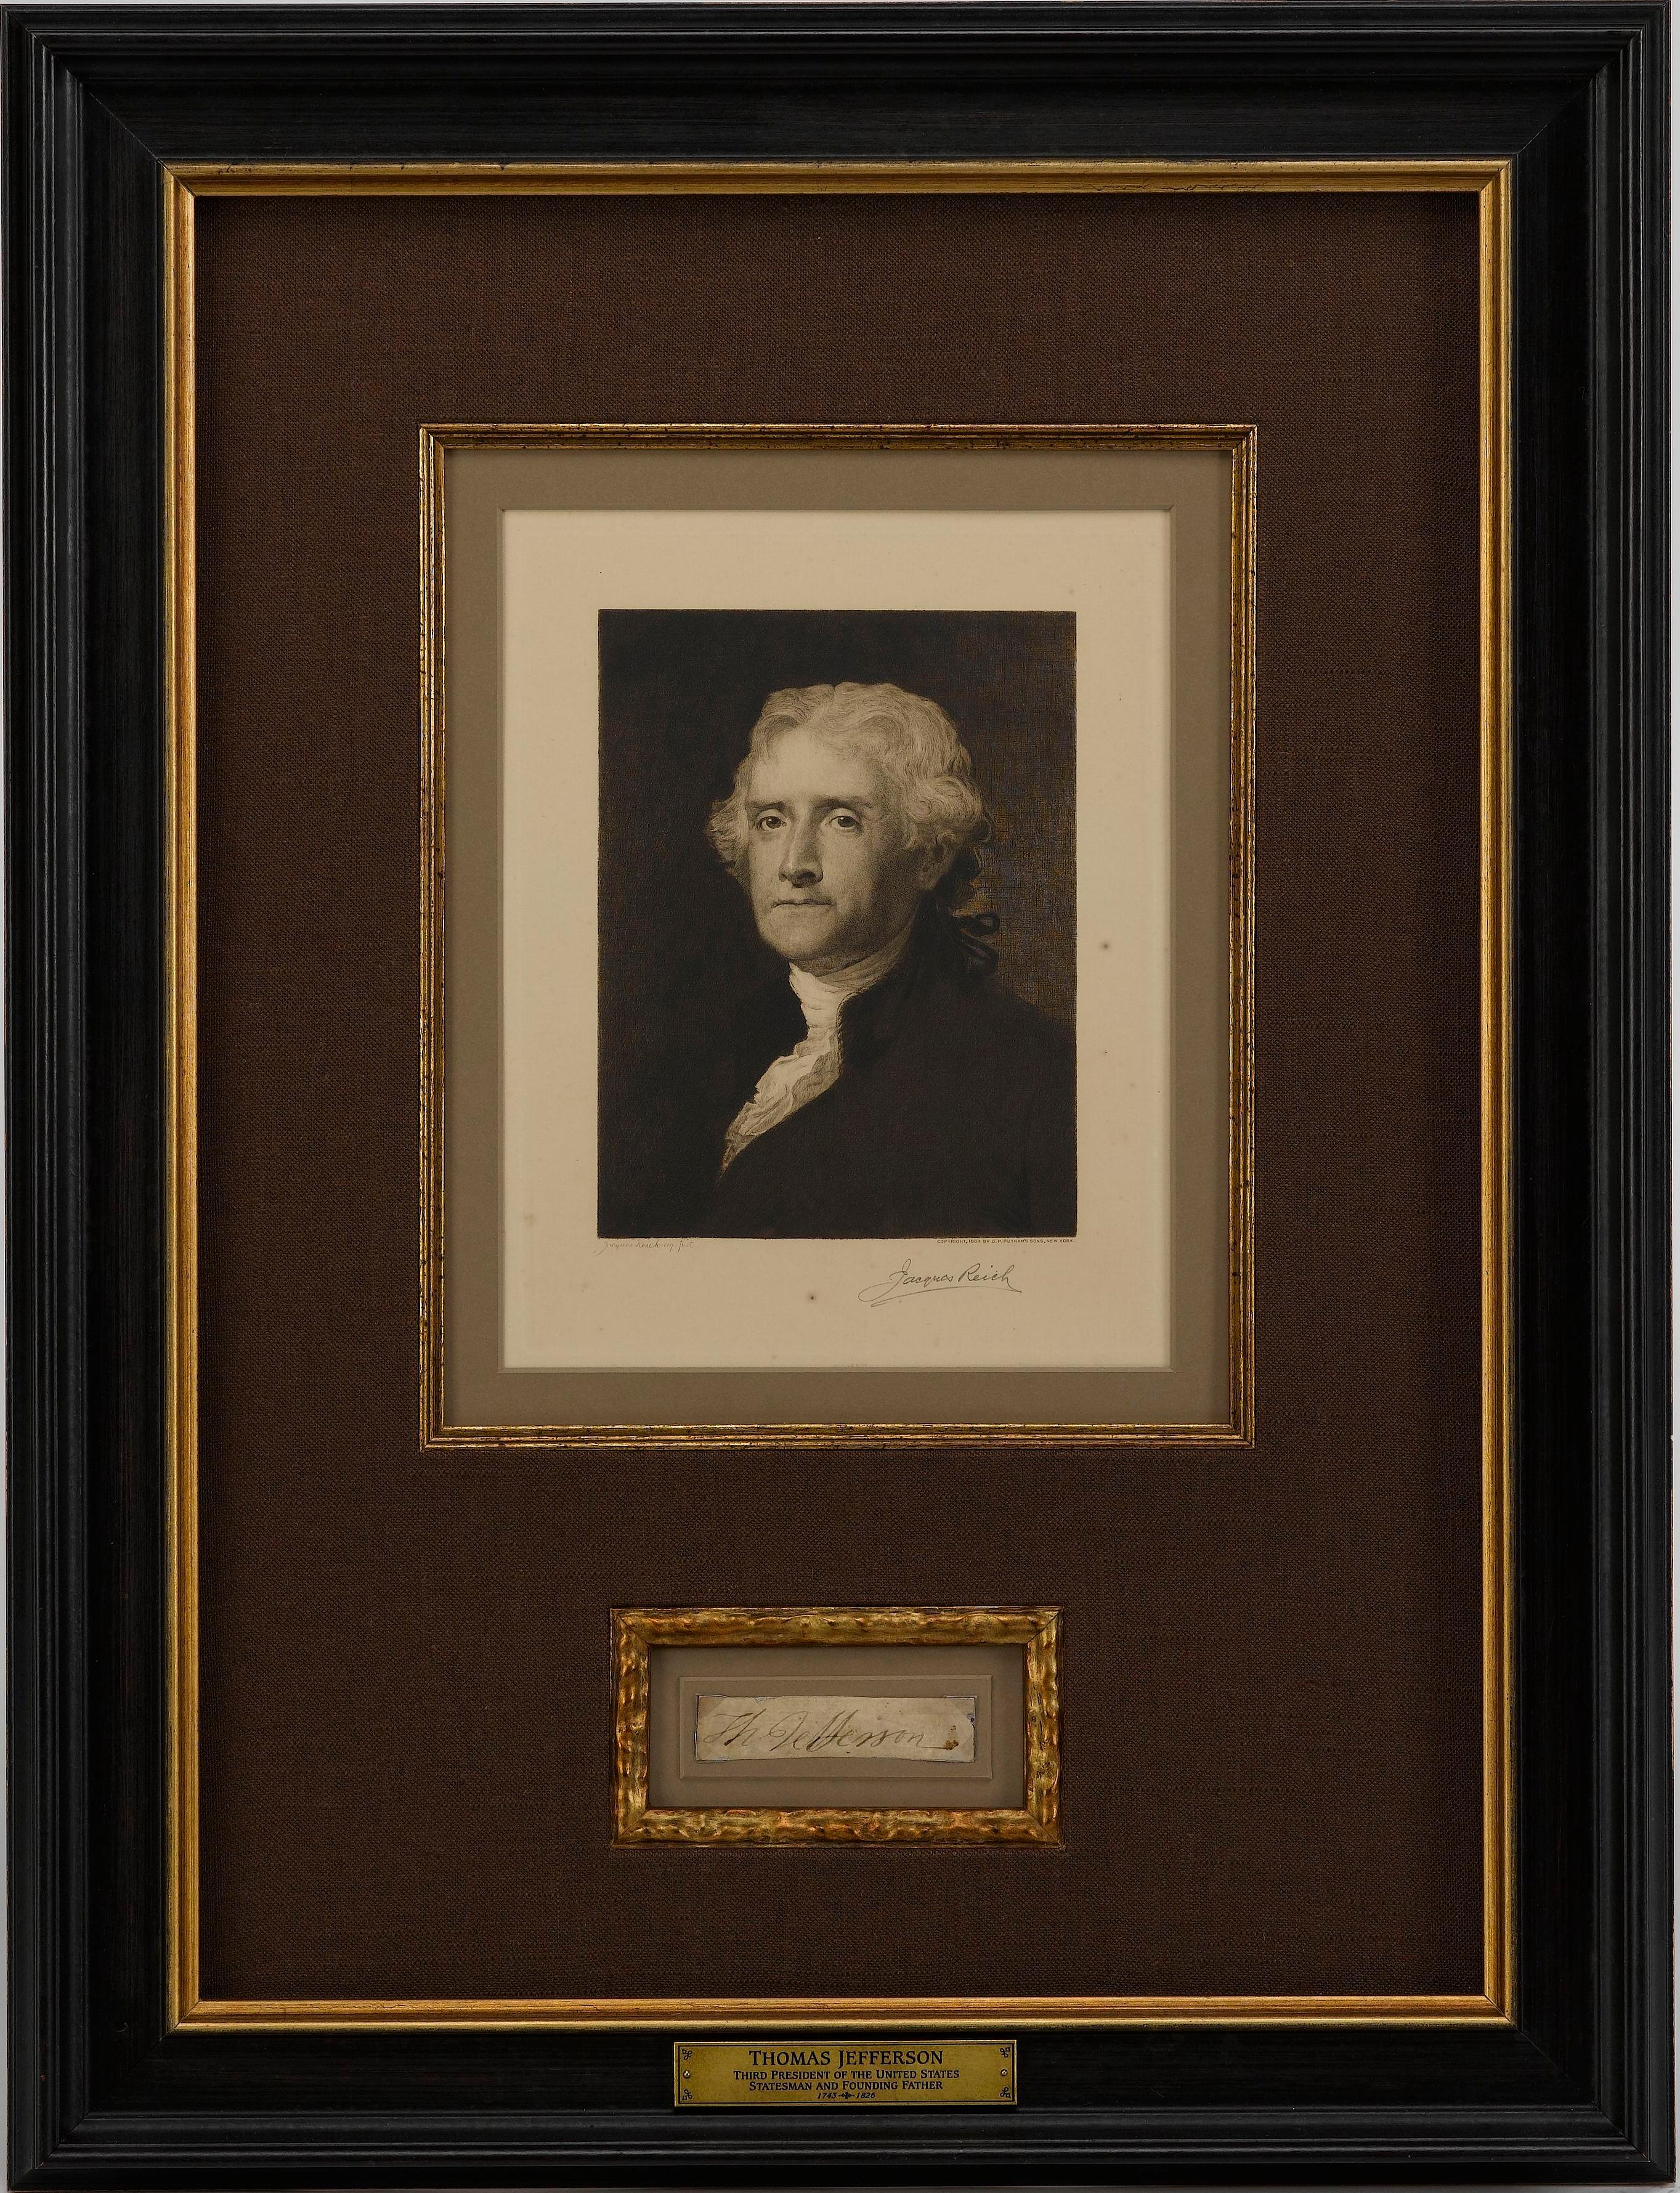 This is an original Thomas Jefferson signature, presented framed with an etched portrait of Jefferson by Jacques Reich. The cut signature reads “Th. Jefferson” and is signed with a quill in black ink. This rare cut Jefferson signature was one of